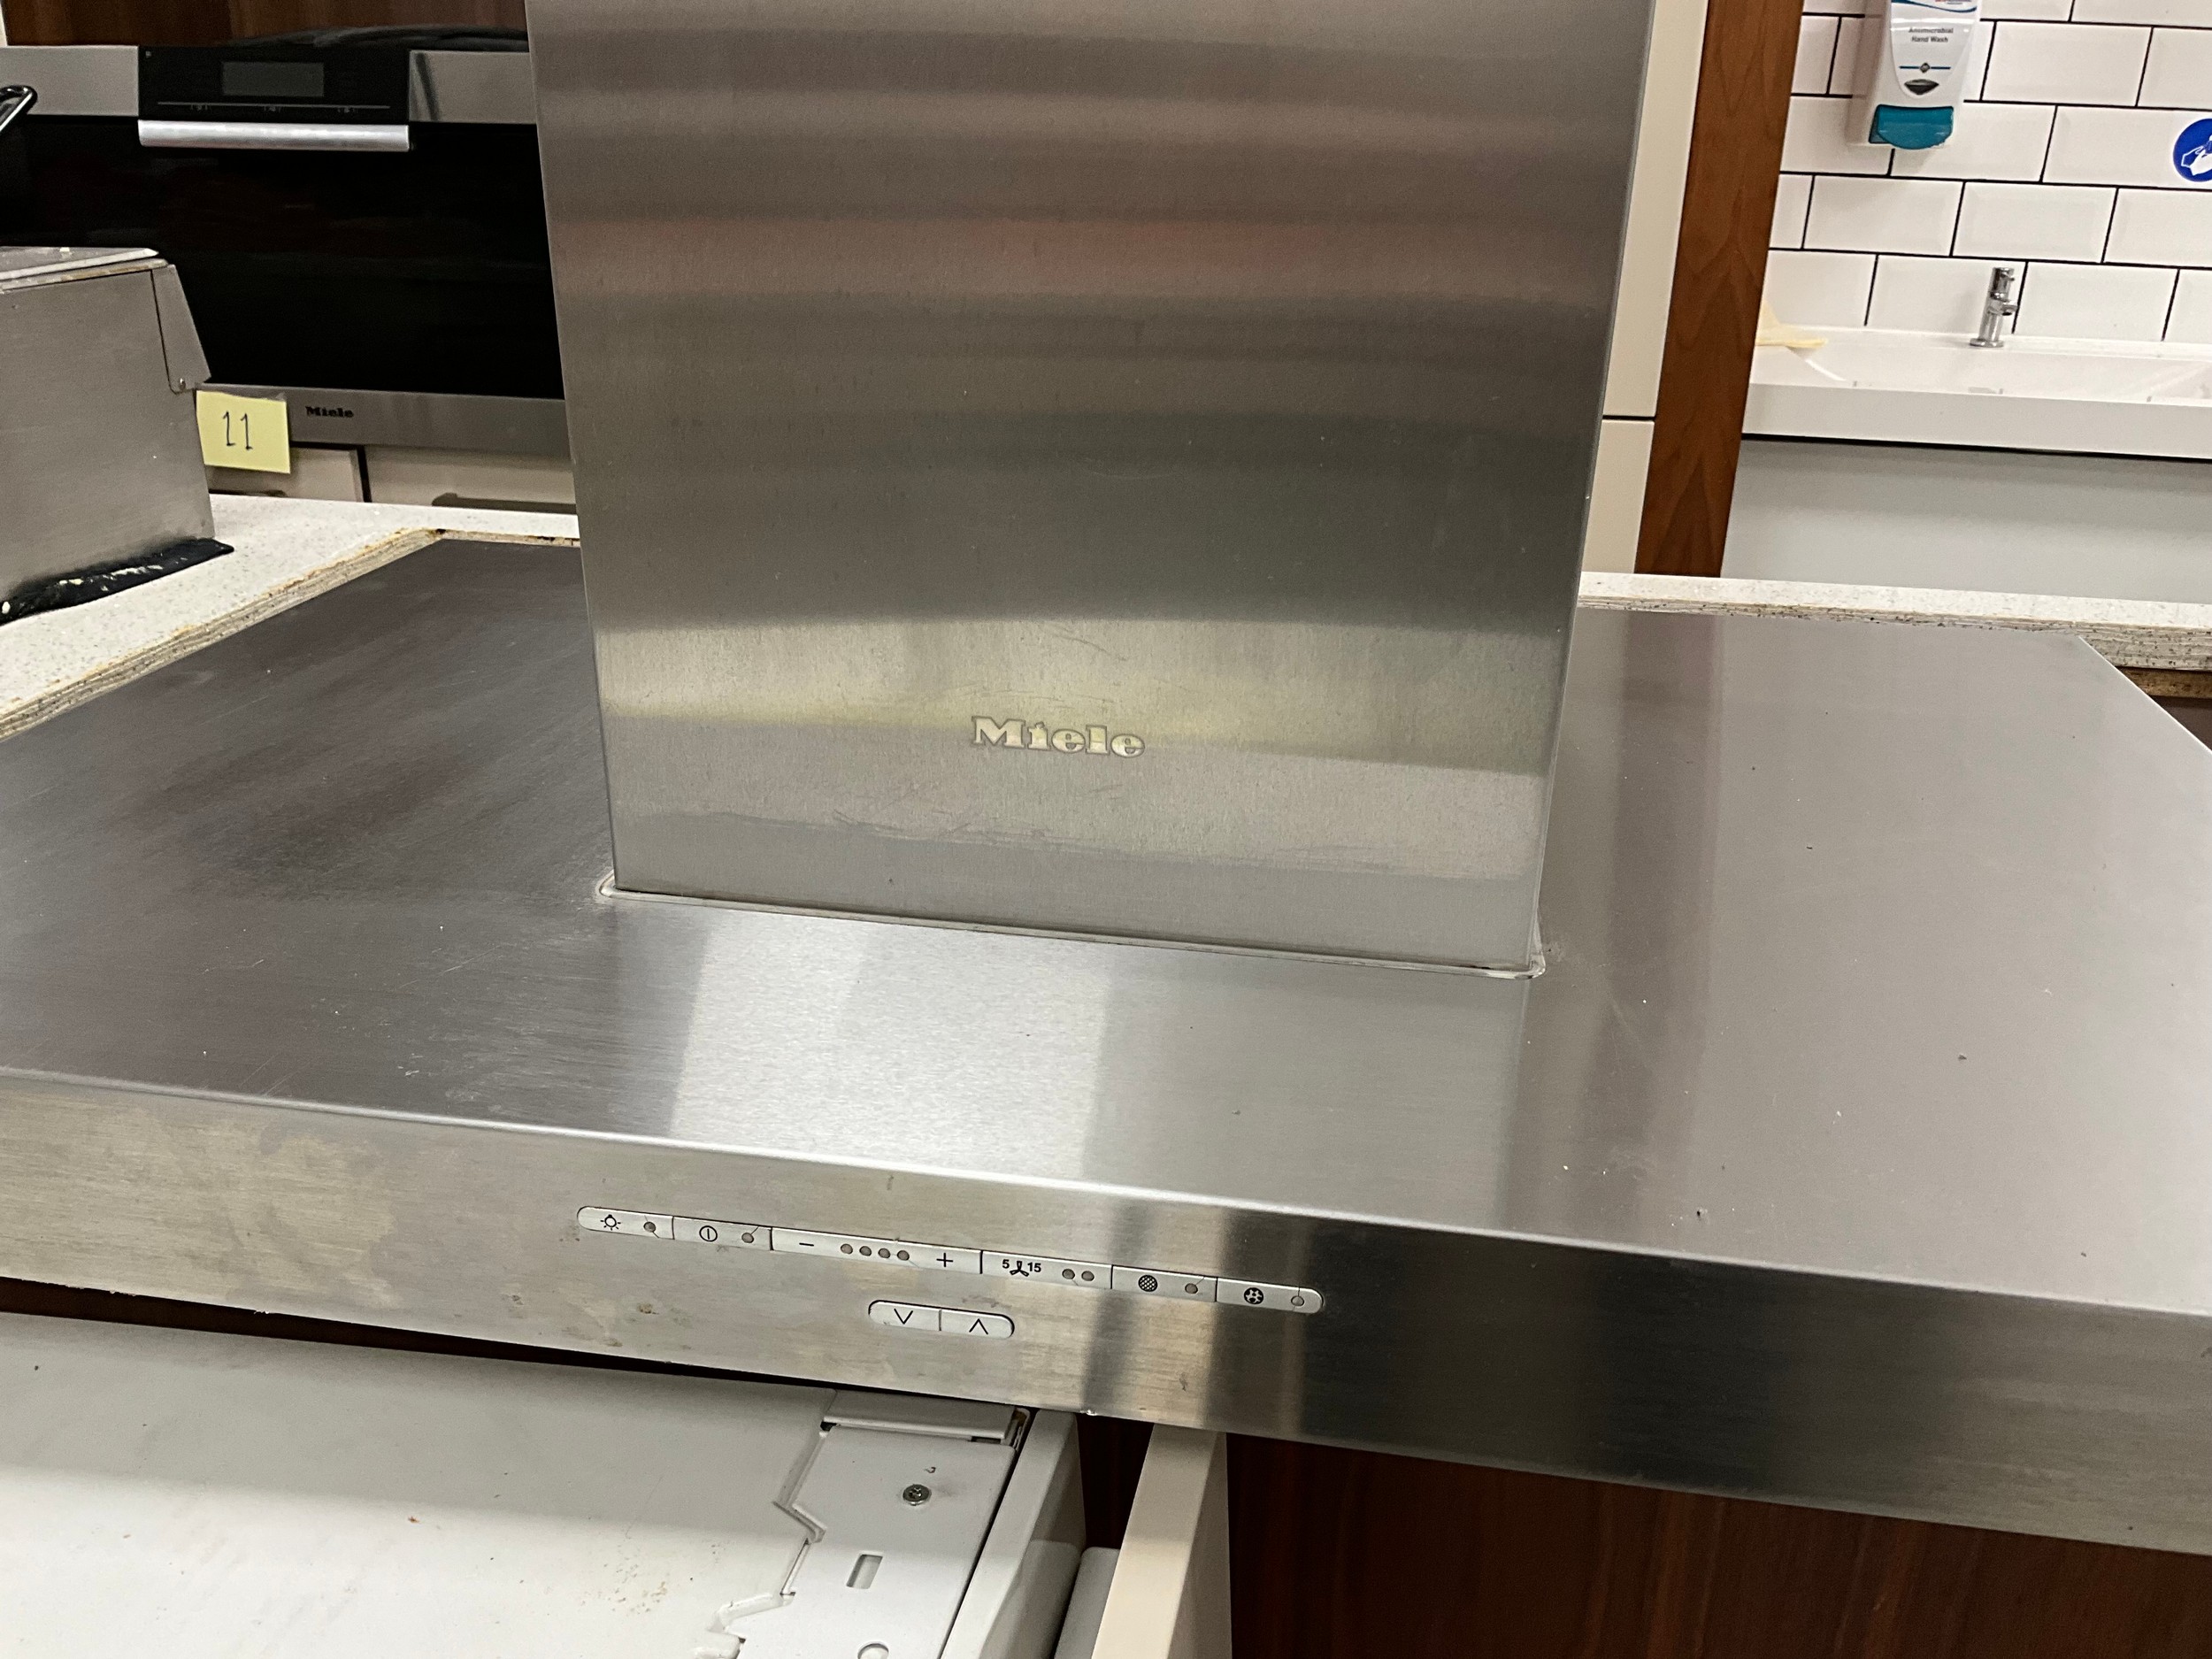 A Miele 90cm, variable height island extractor hood, model number DA 420 V. - Image 2 of 2